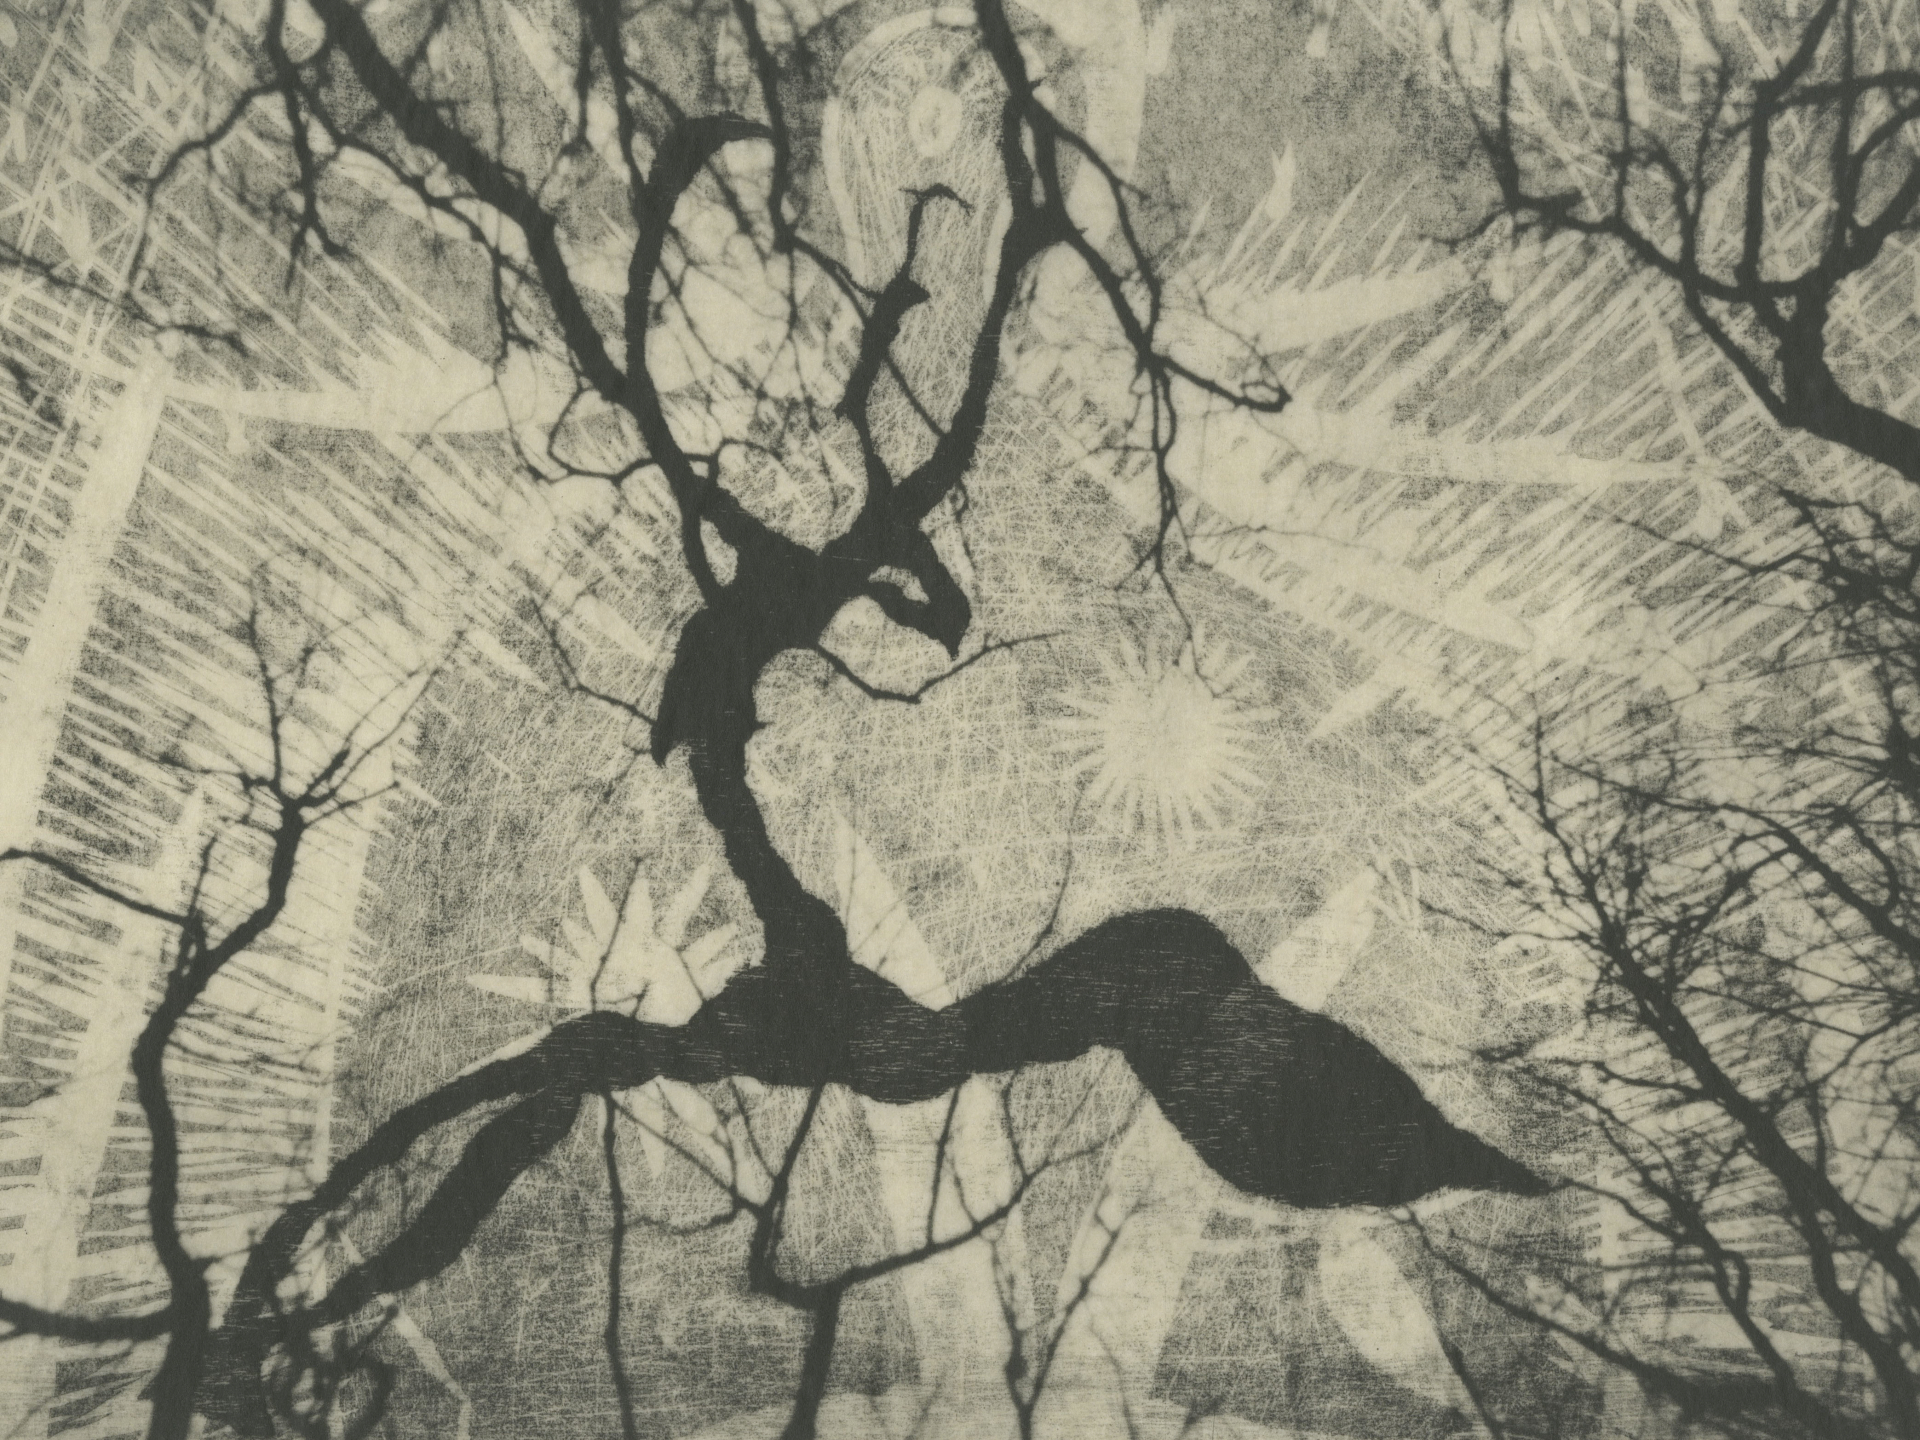 Black and white print of tree-like forms